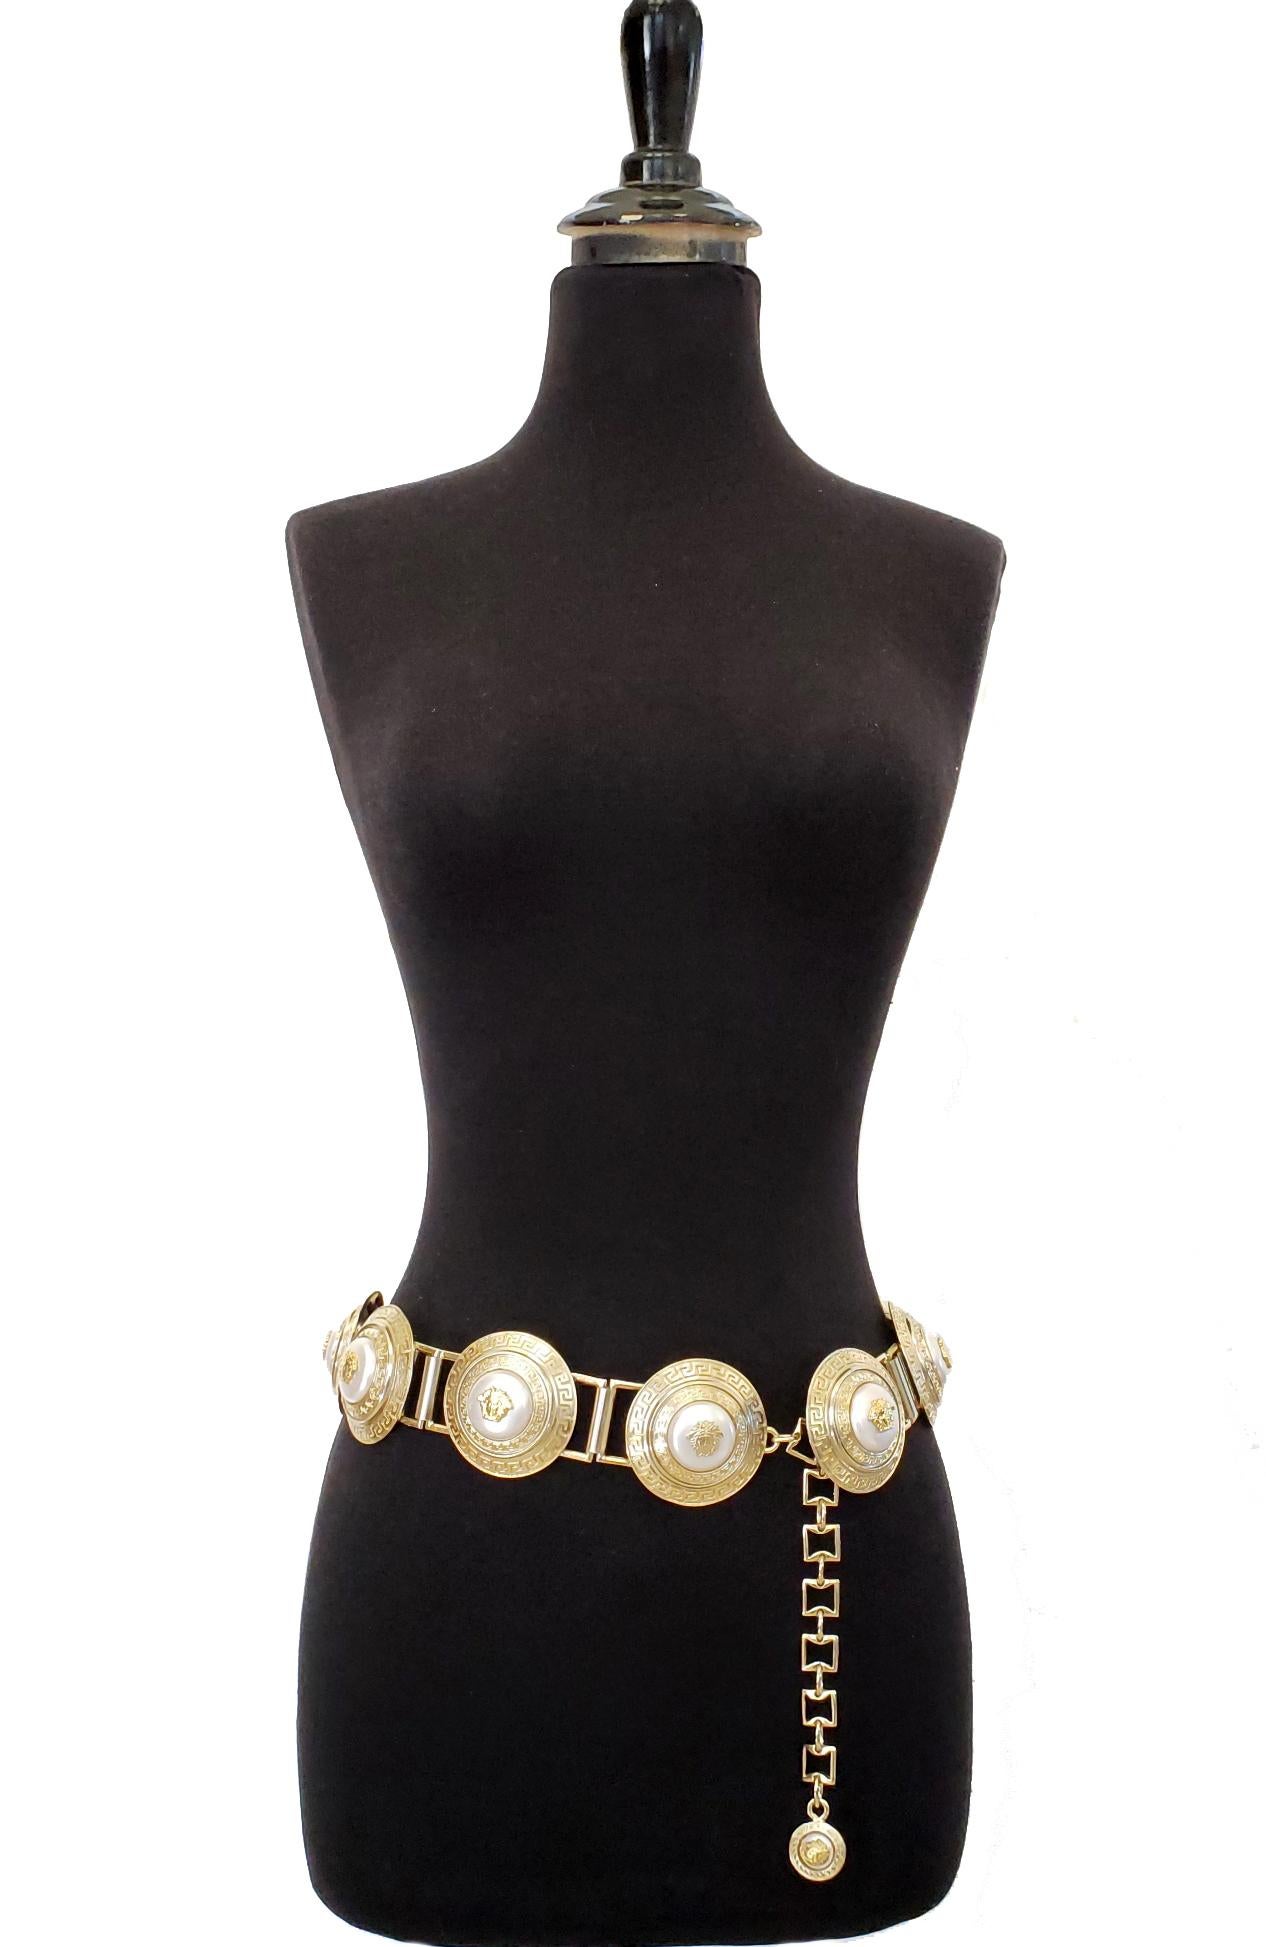 Gianni Versace
1991 Atelier
Vintage Belt

Metal chain Belt with Pearl Detail

A striking statement piece!

Highly collectible.

Made in Italy.

Medallion diameter is 2 1/2